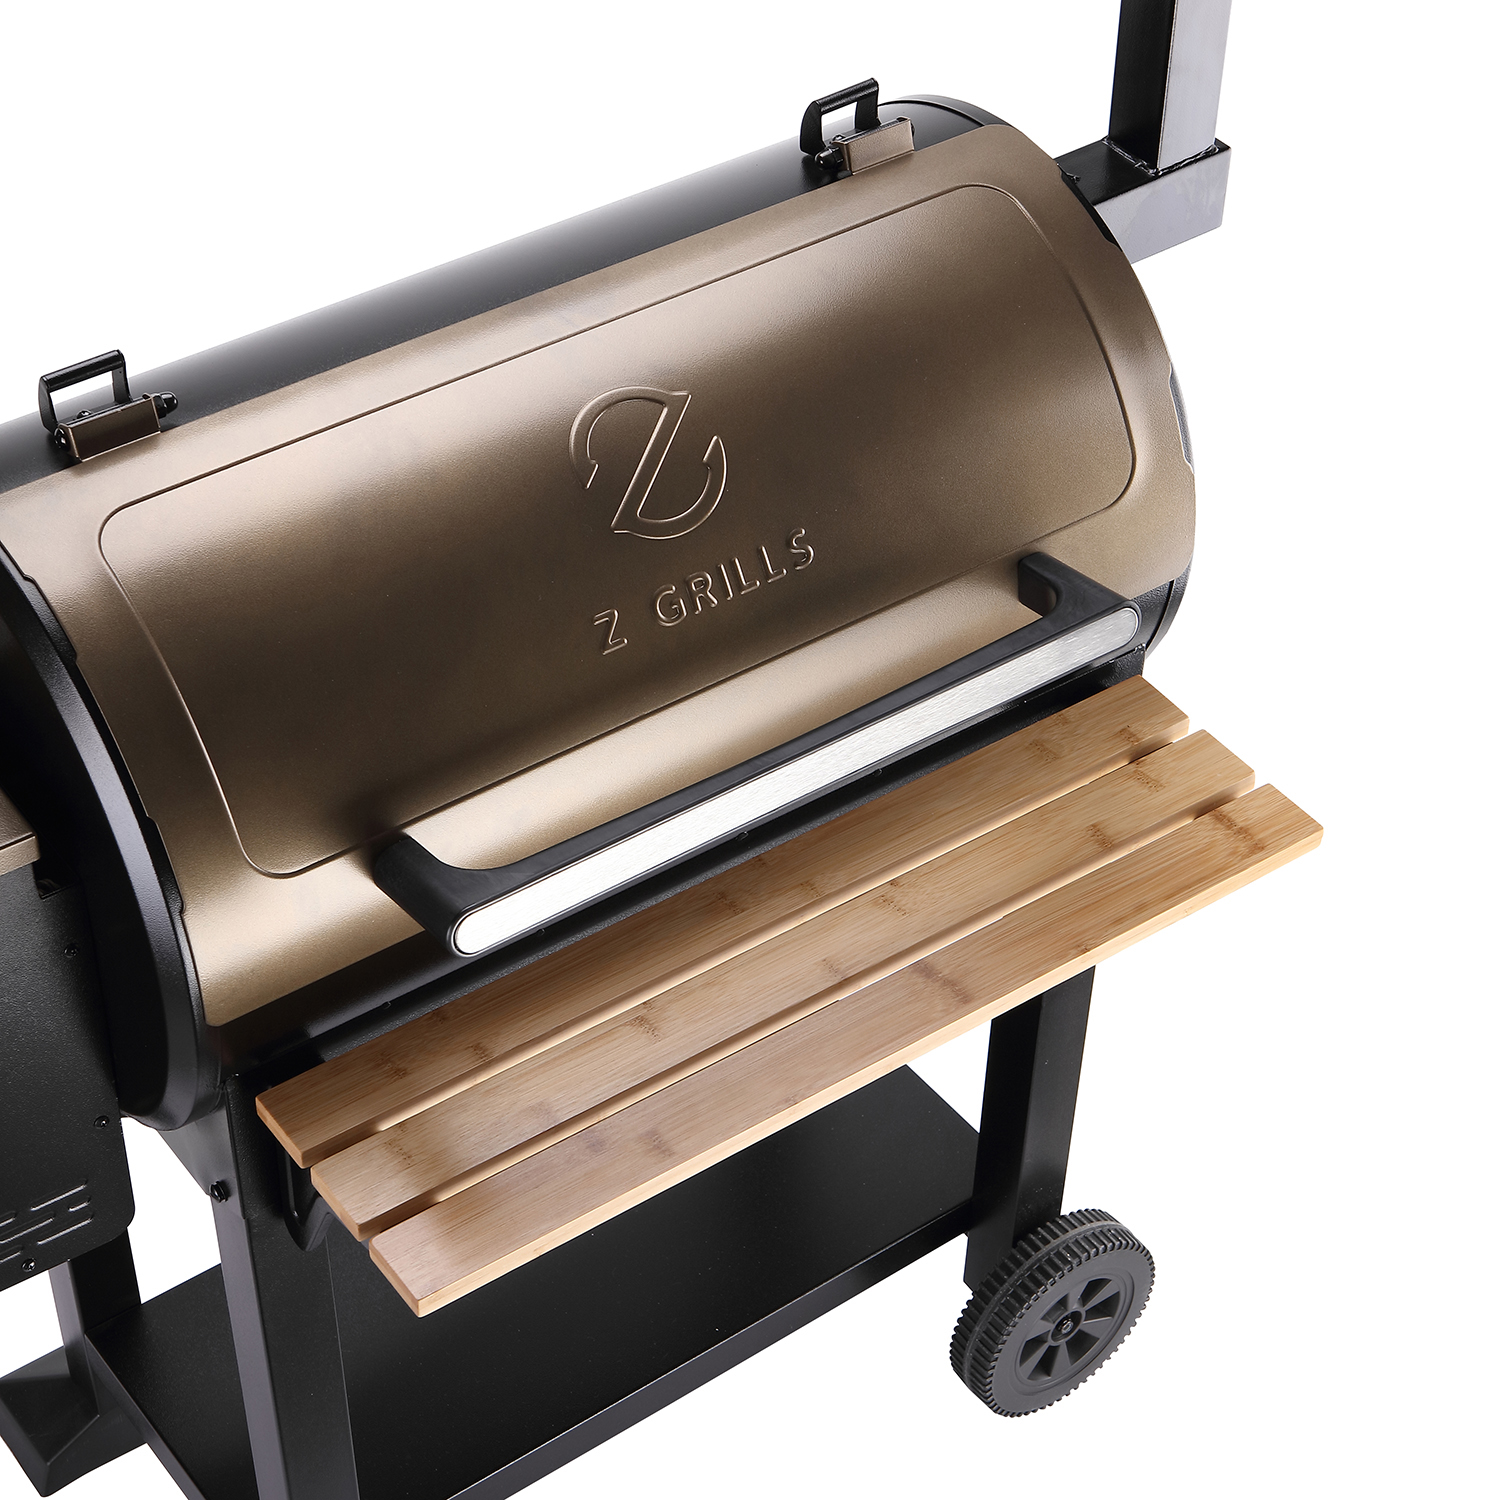 Z GRILLS Wood Pellet Grill and Electric Smoker w/ Auto Temperature Control - image 2 of 6